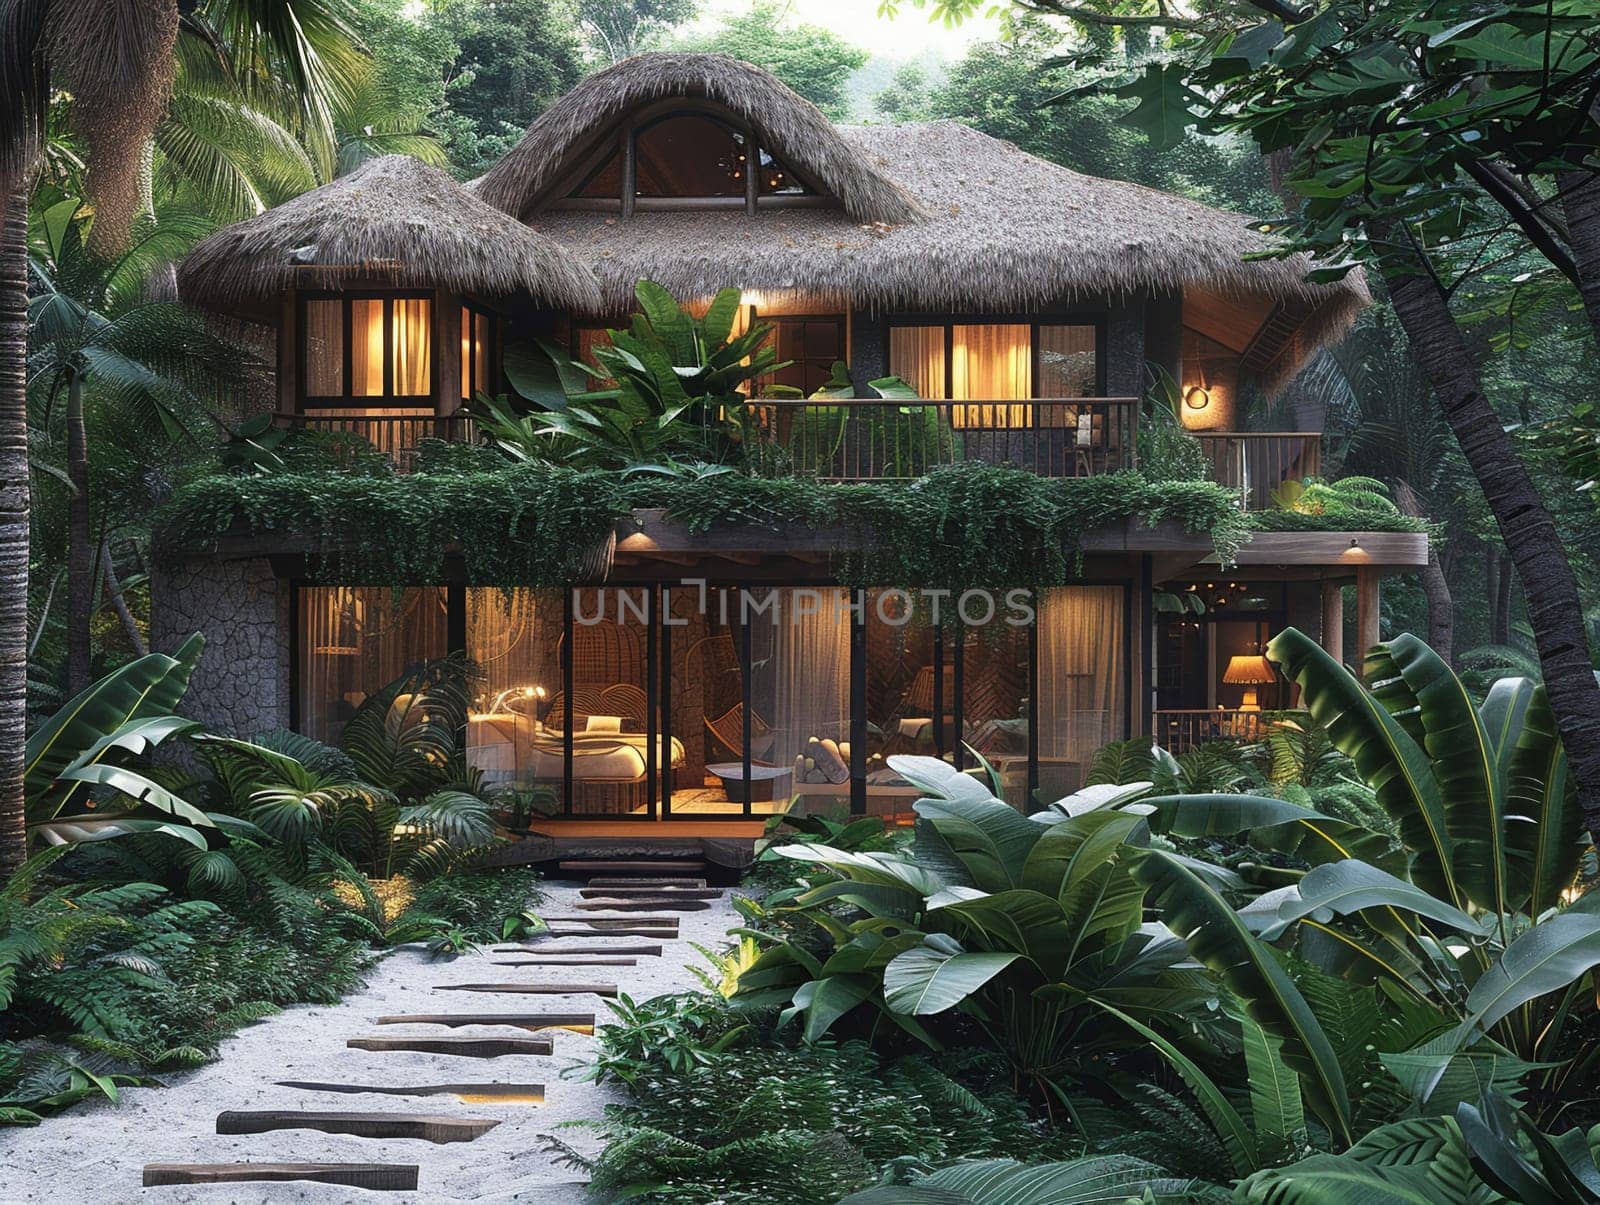 Luxurious Tropical Hideaway Nestled in Lush Foliage by Benzoix